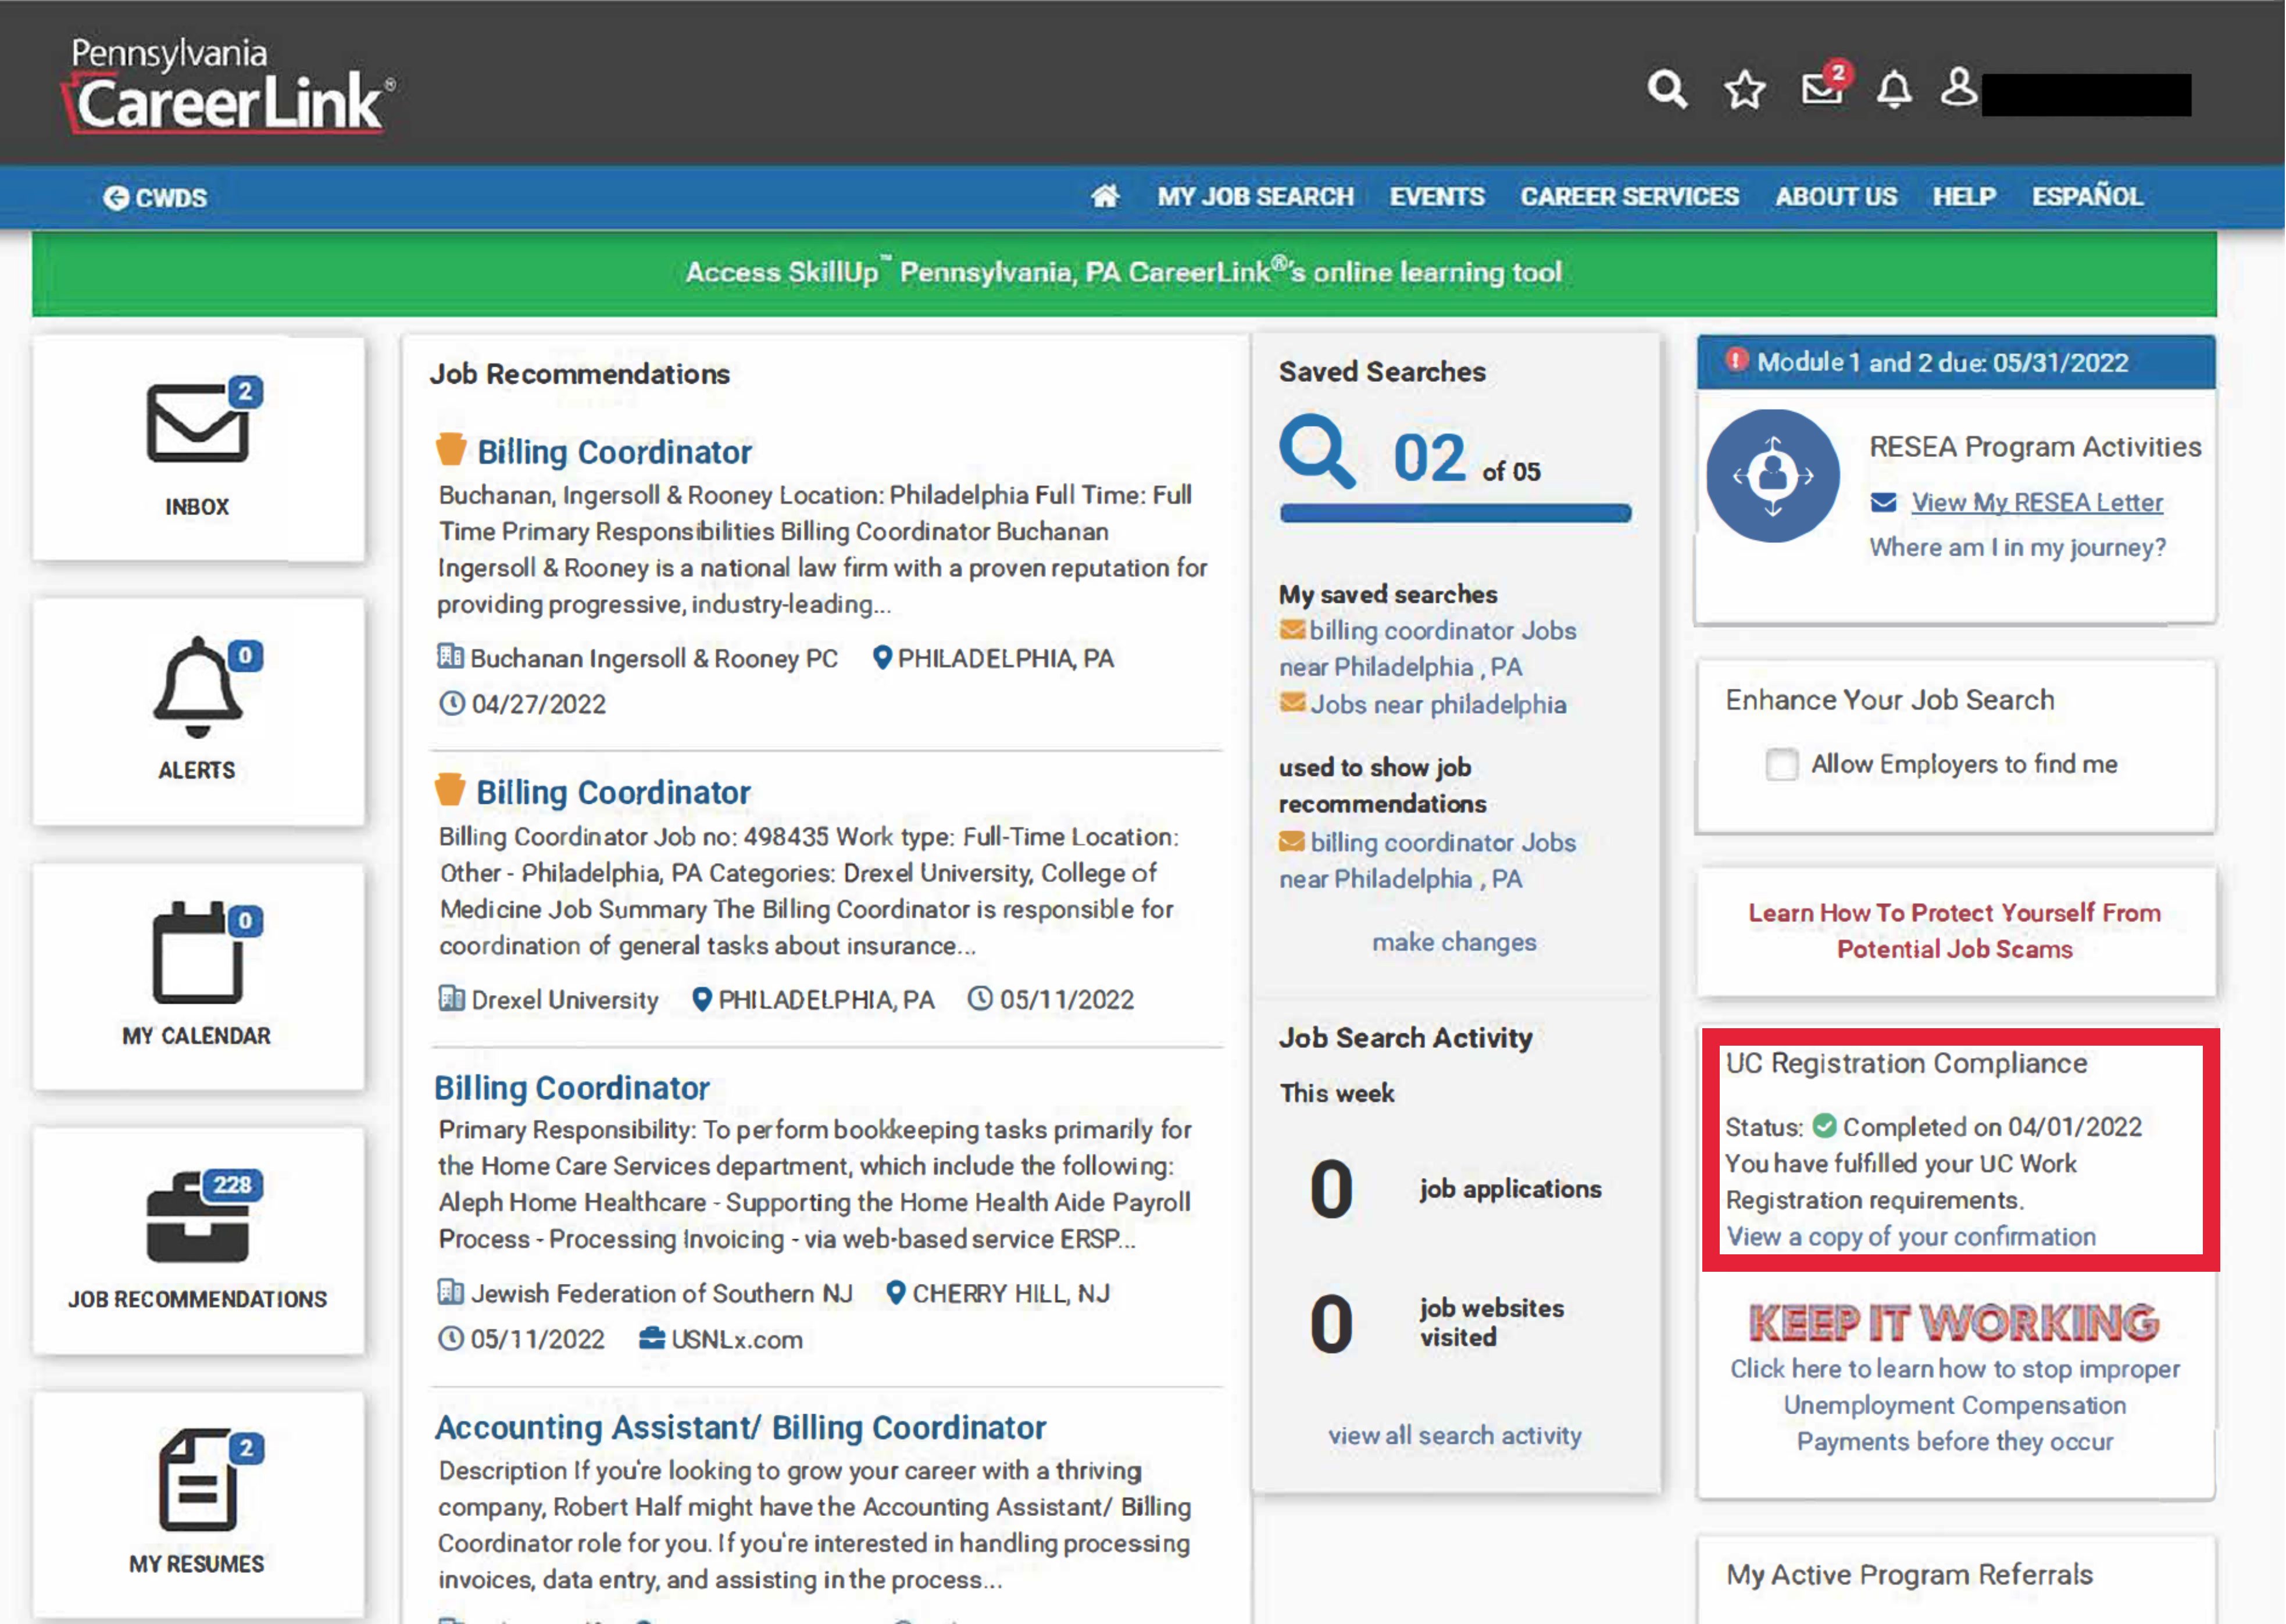 Screenshot of the CareerLink work registration portal, with the UC Registration Compliance section outlined in red.